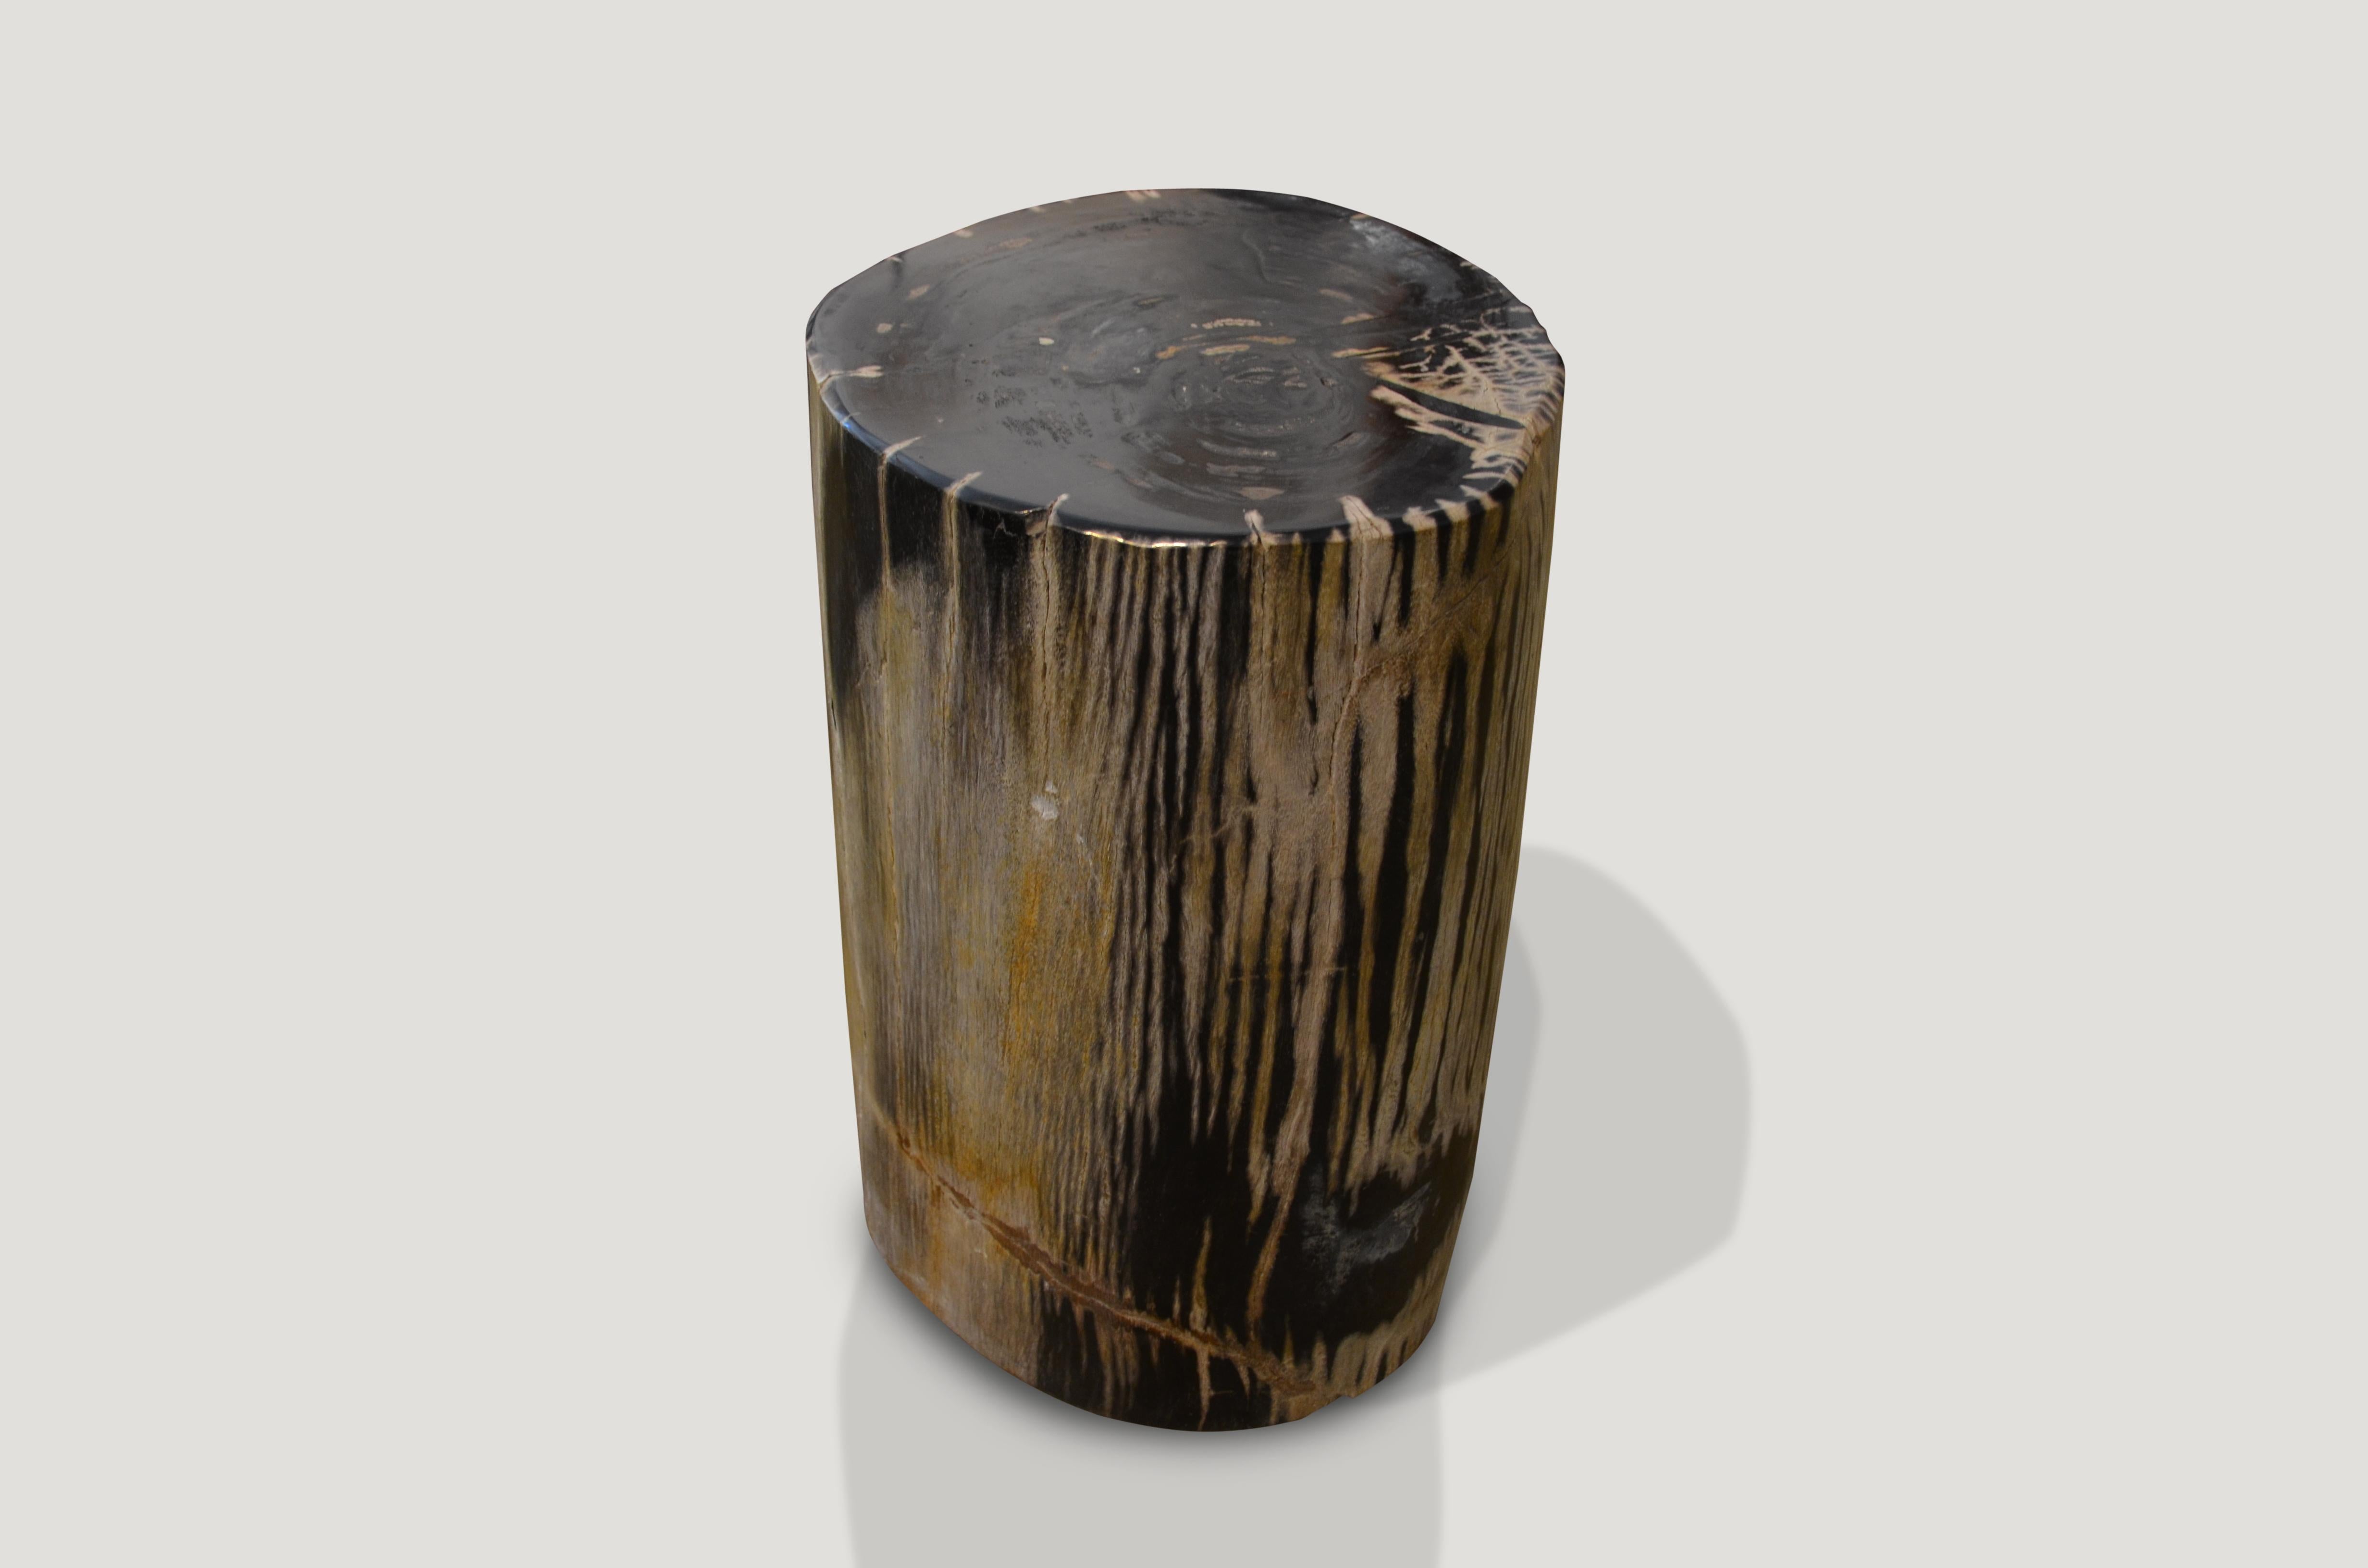 Stunning contrasting tones with a zebra effect.

We source the highest quality petrified wood available. Each piece is hand selected and highly polished with minimal cracks. Petrified wood is extremely versatile – even great inside a bathroom